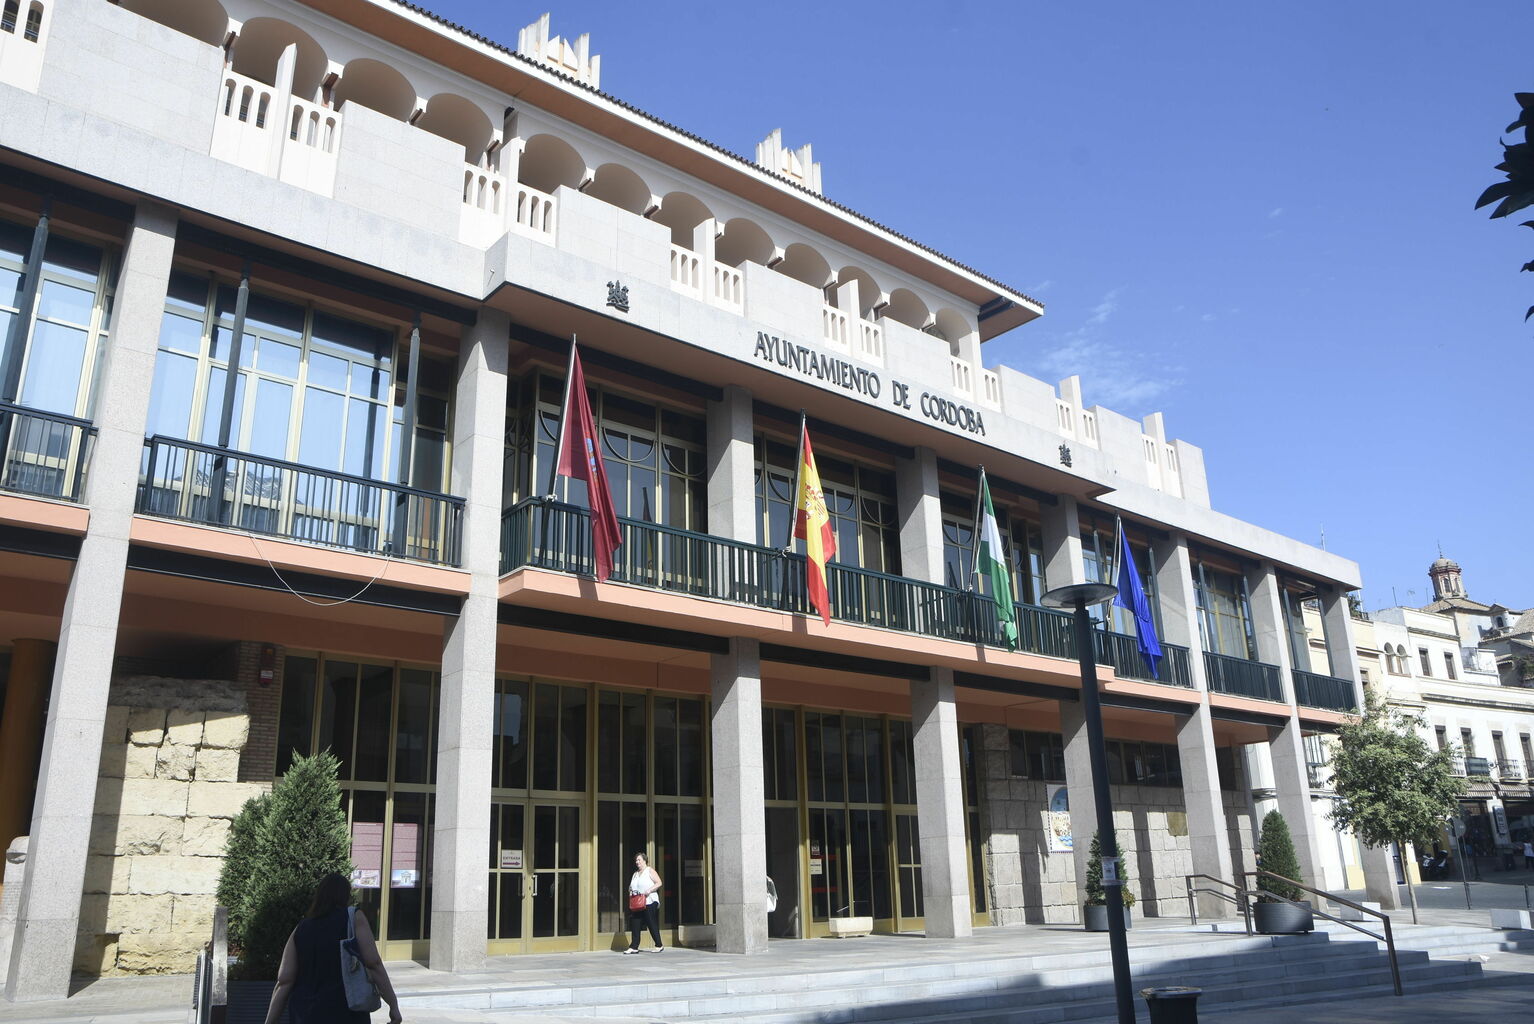 Town hall in Spain's Andalucia conned out of €400,000 in online scam ...